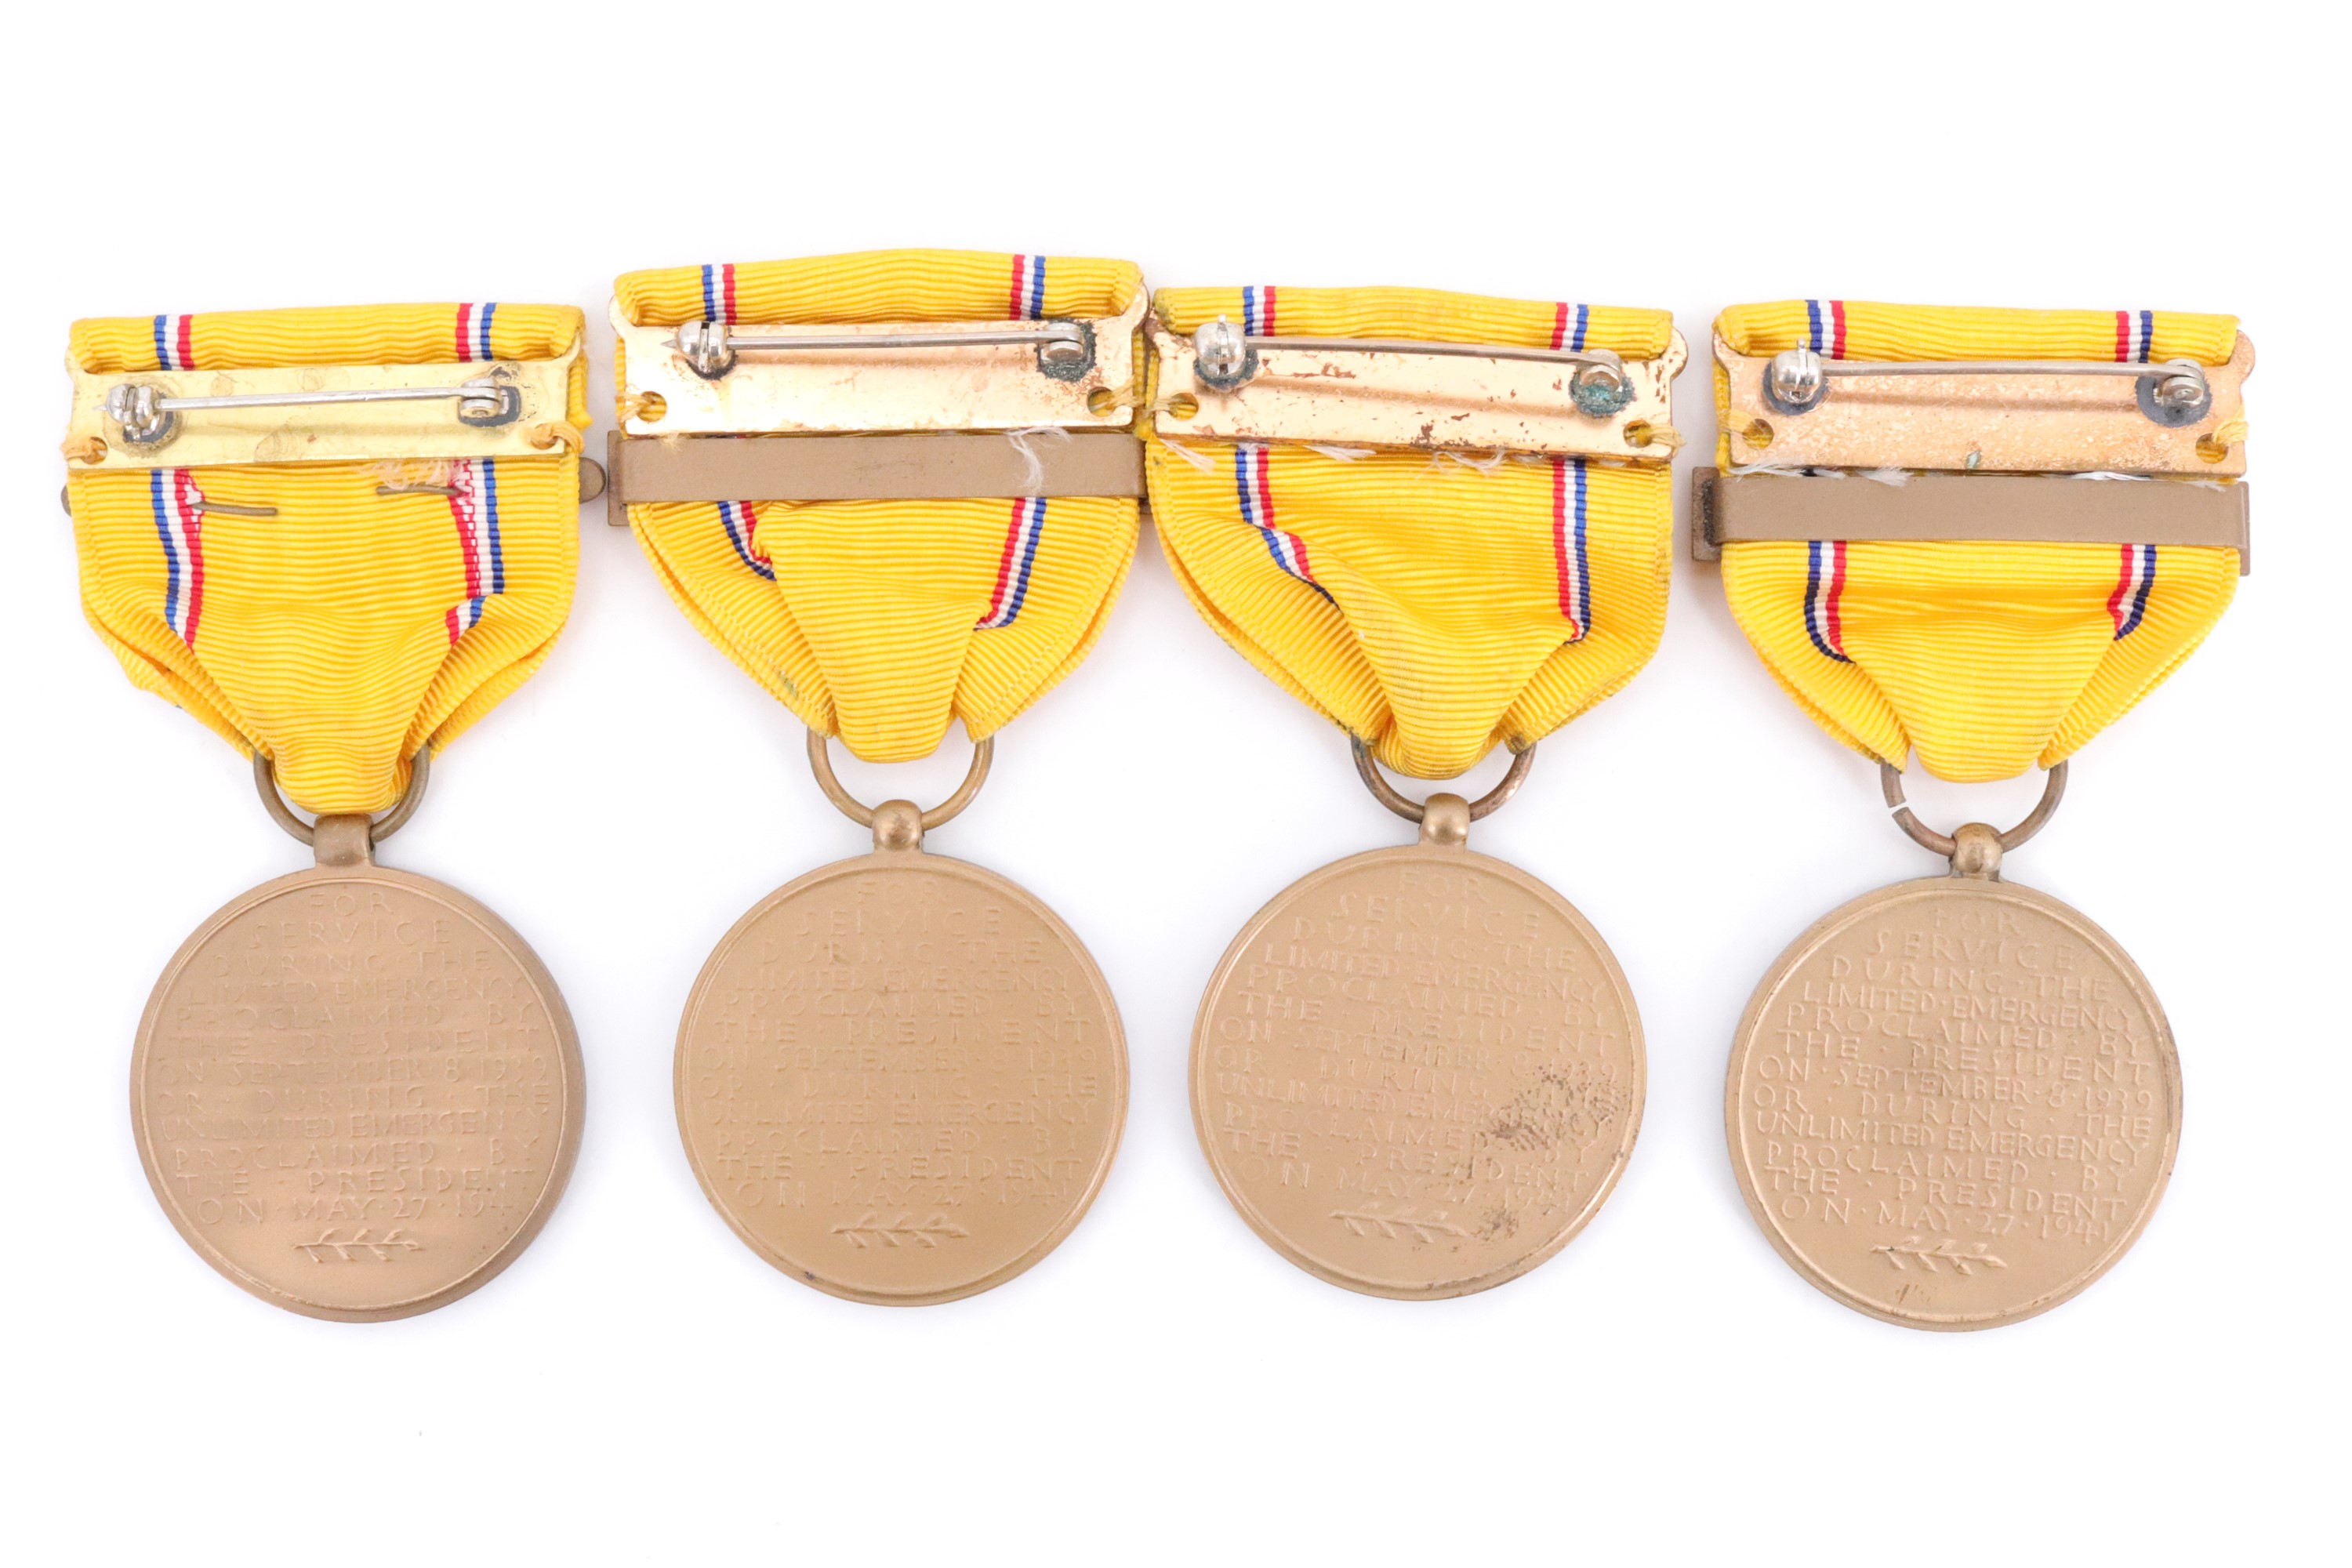 Three US American Asiatic Pacific Campaign Medals, boxed - Image 4 of 4